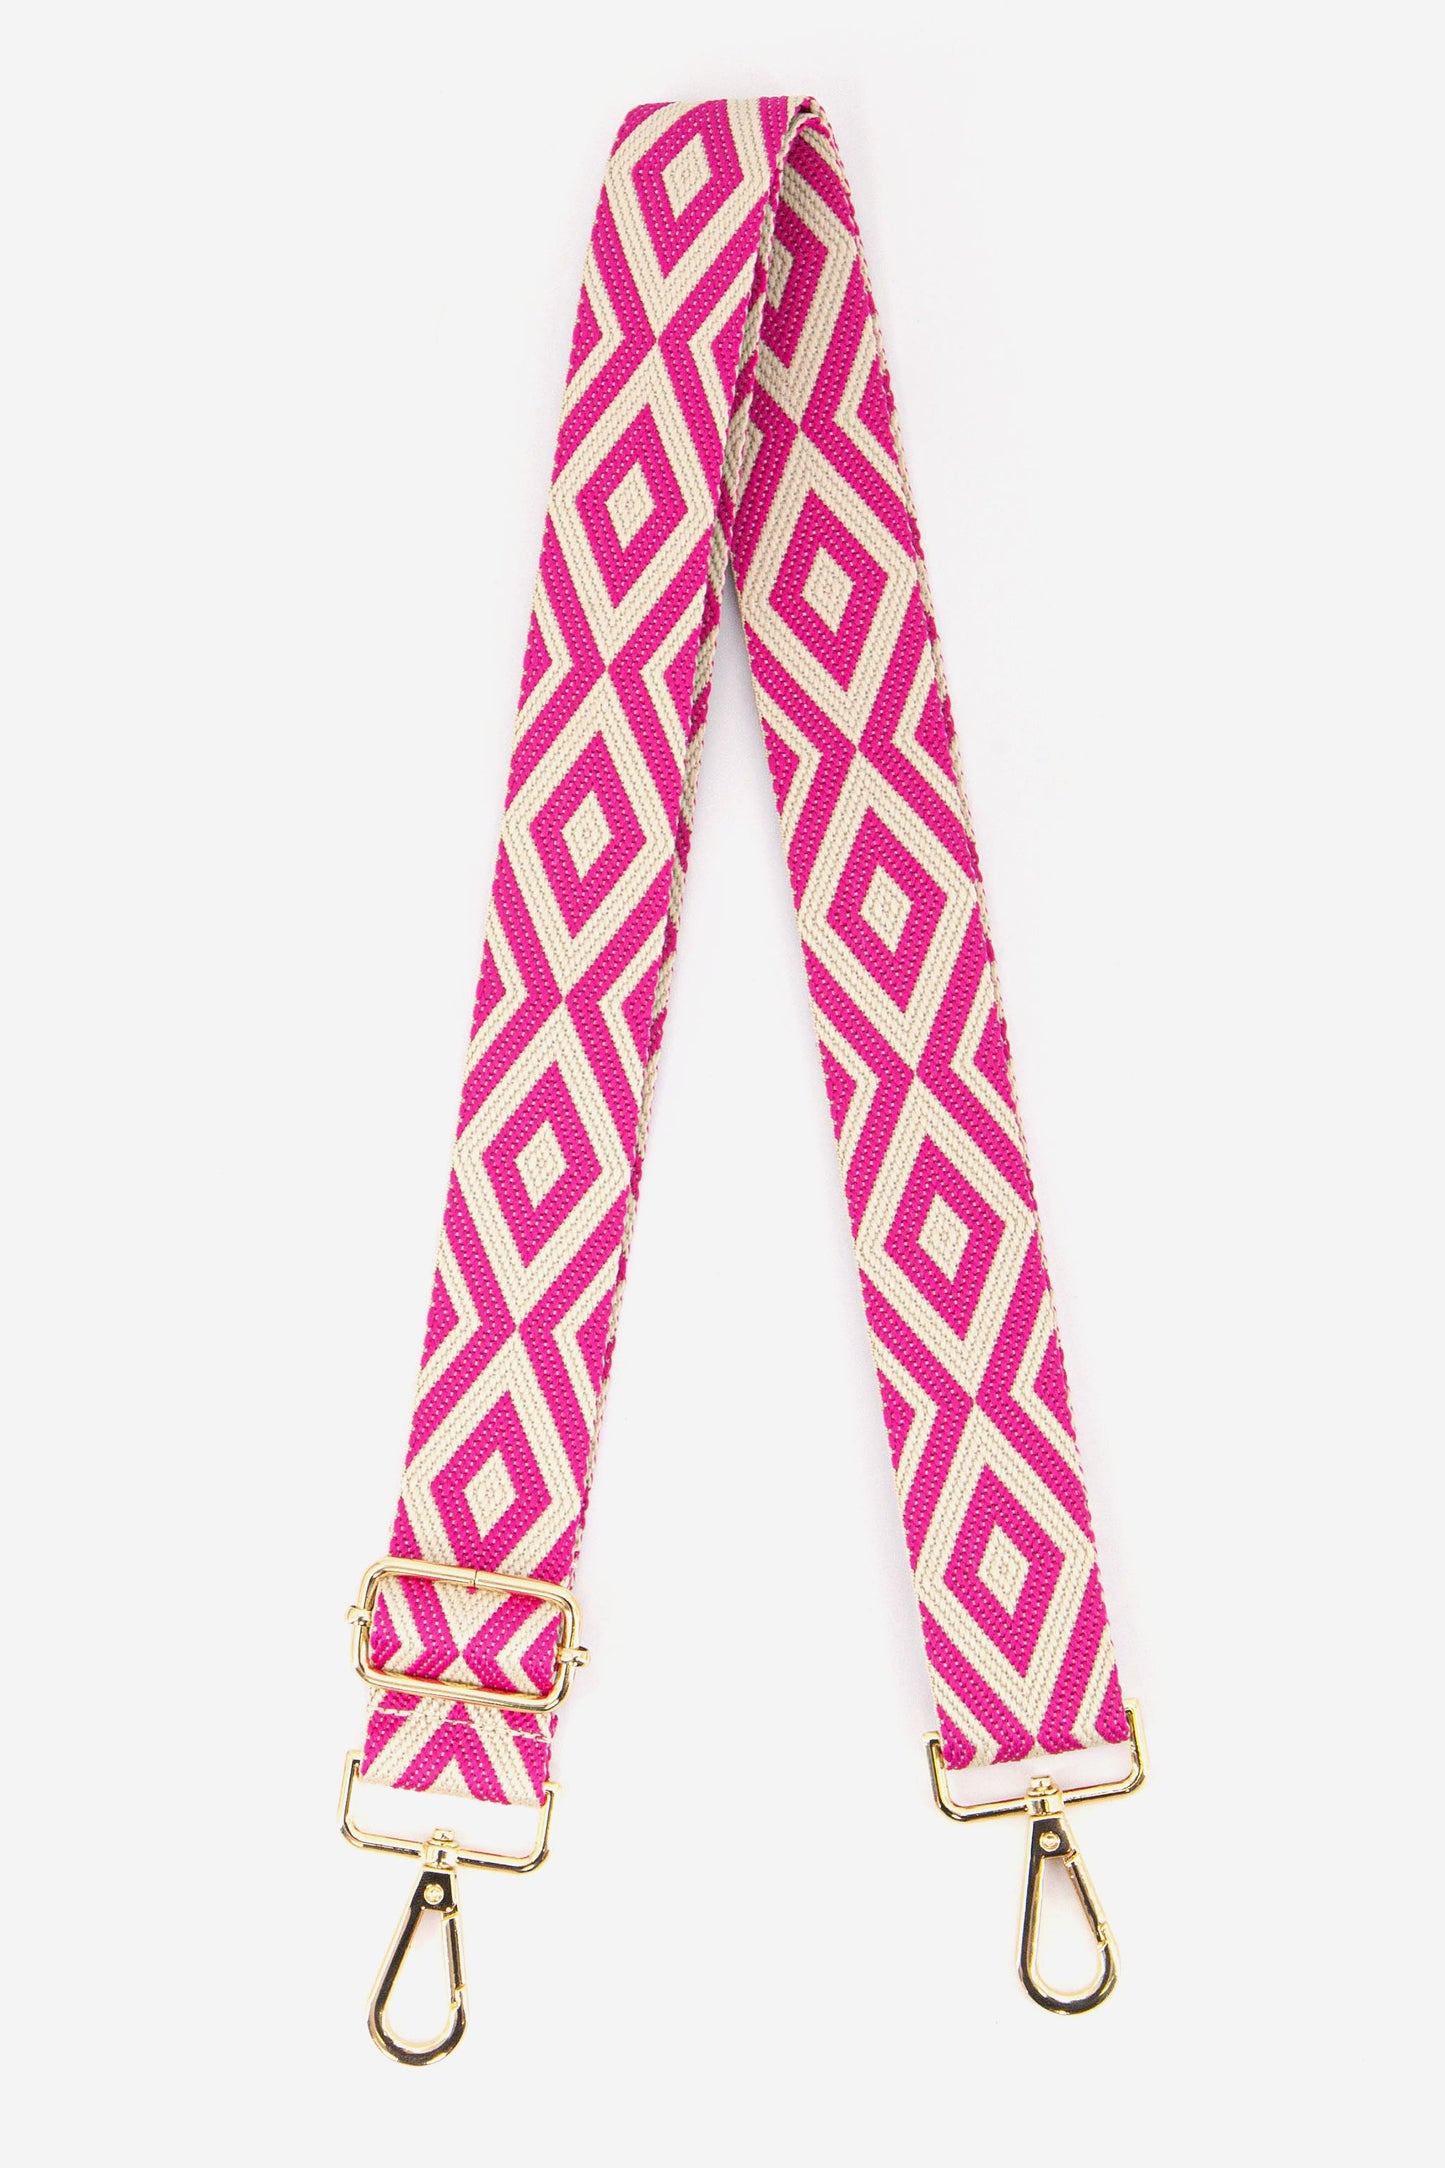 fuchsia pink and white ikat pattern replacement bag strap with gold clip on snap hooks